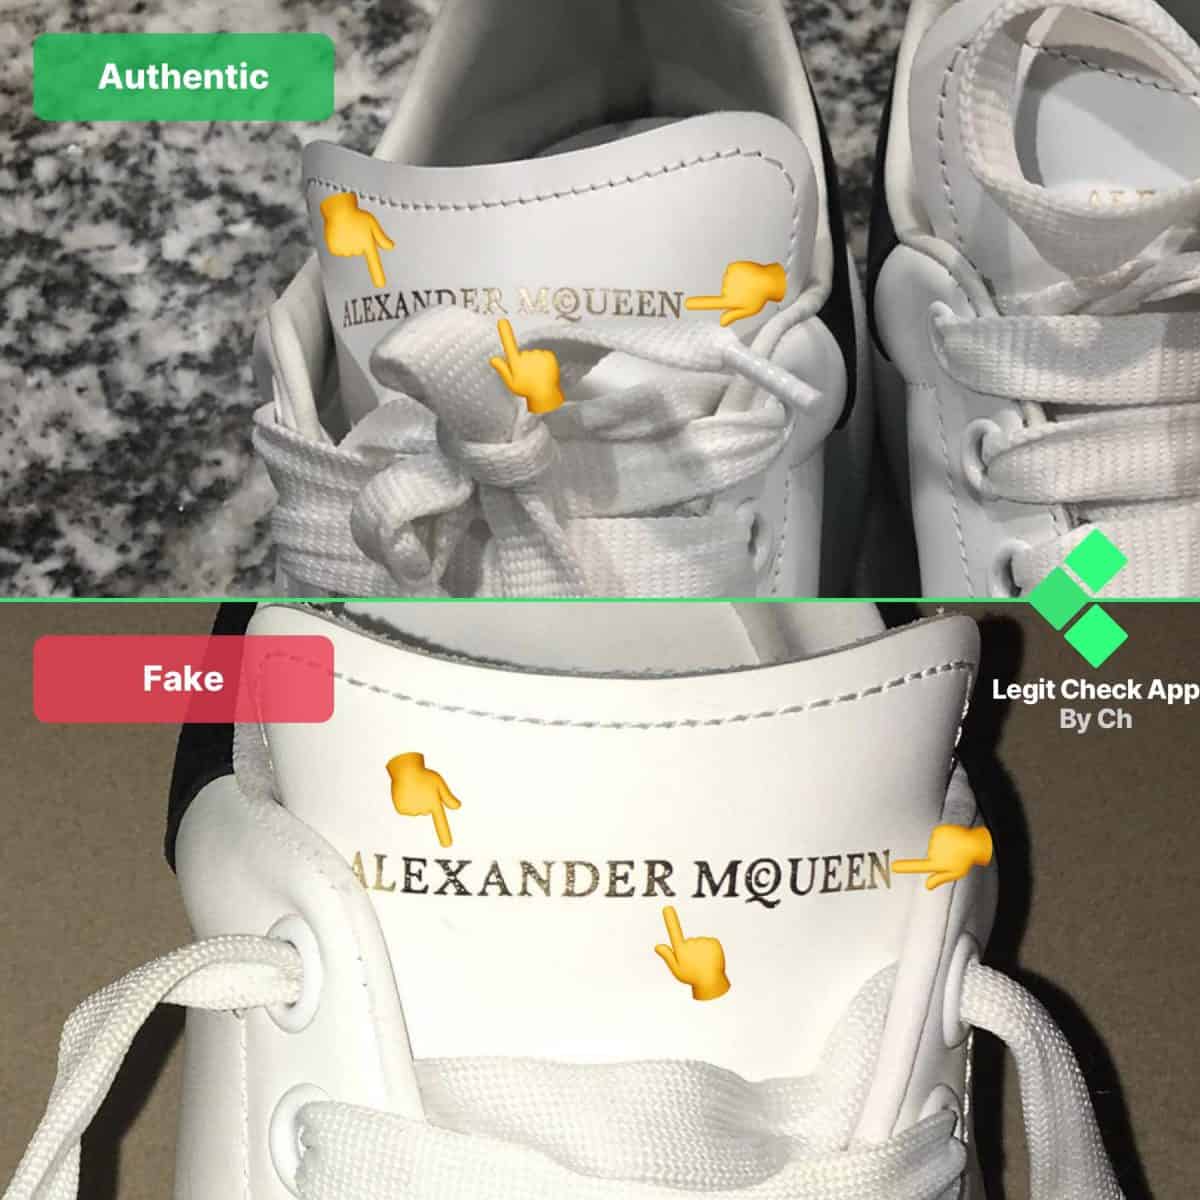 How is the Alexander McQueen name written on the tongue tag?